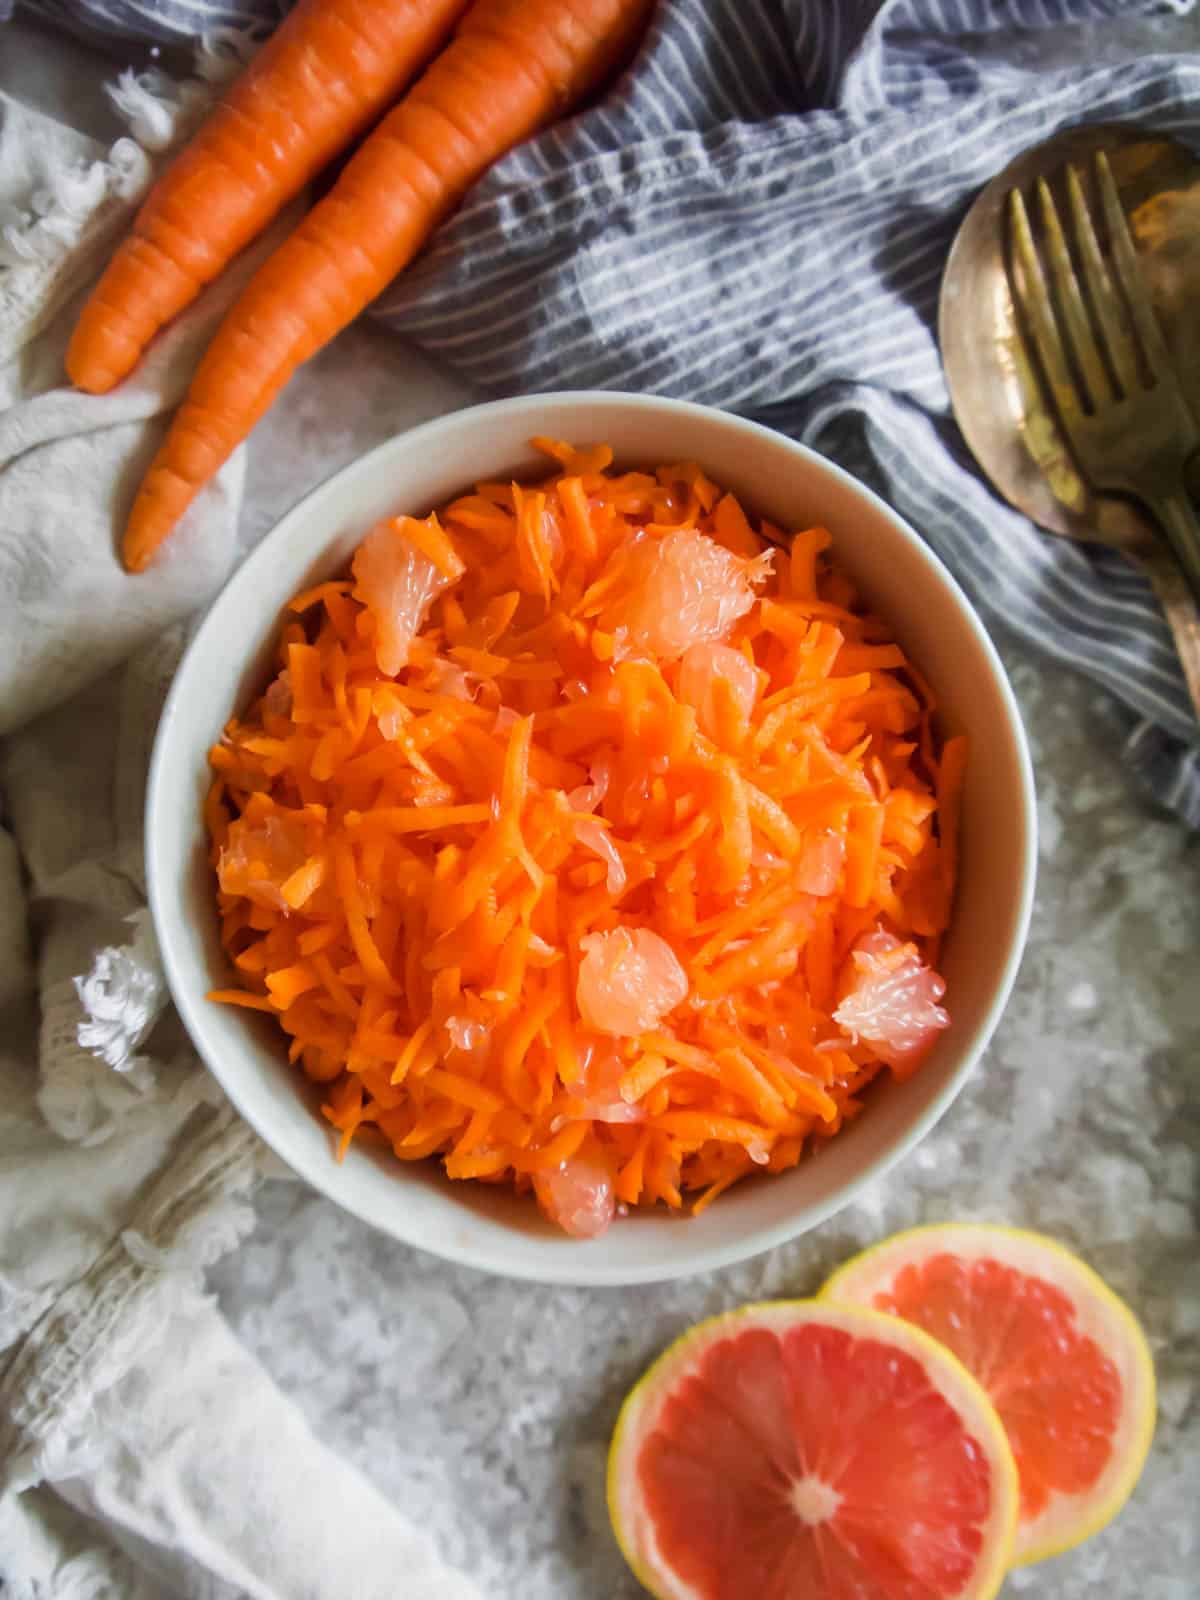 Raw Shredded carrot in a bowl, aerial view.